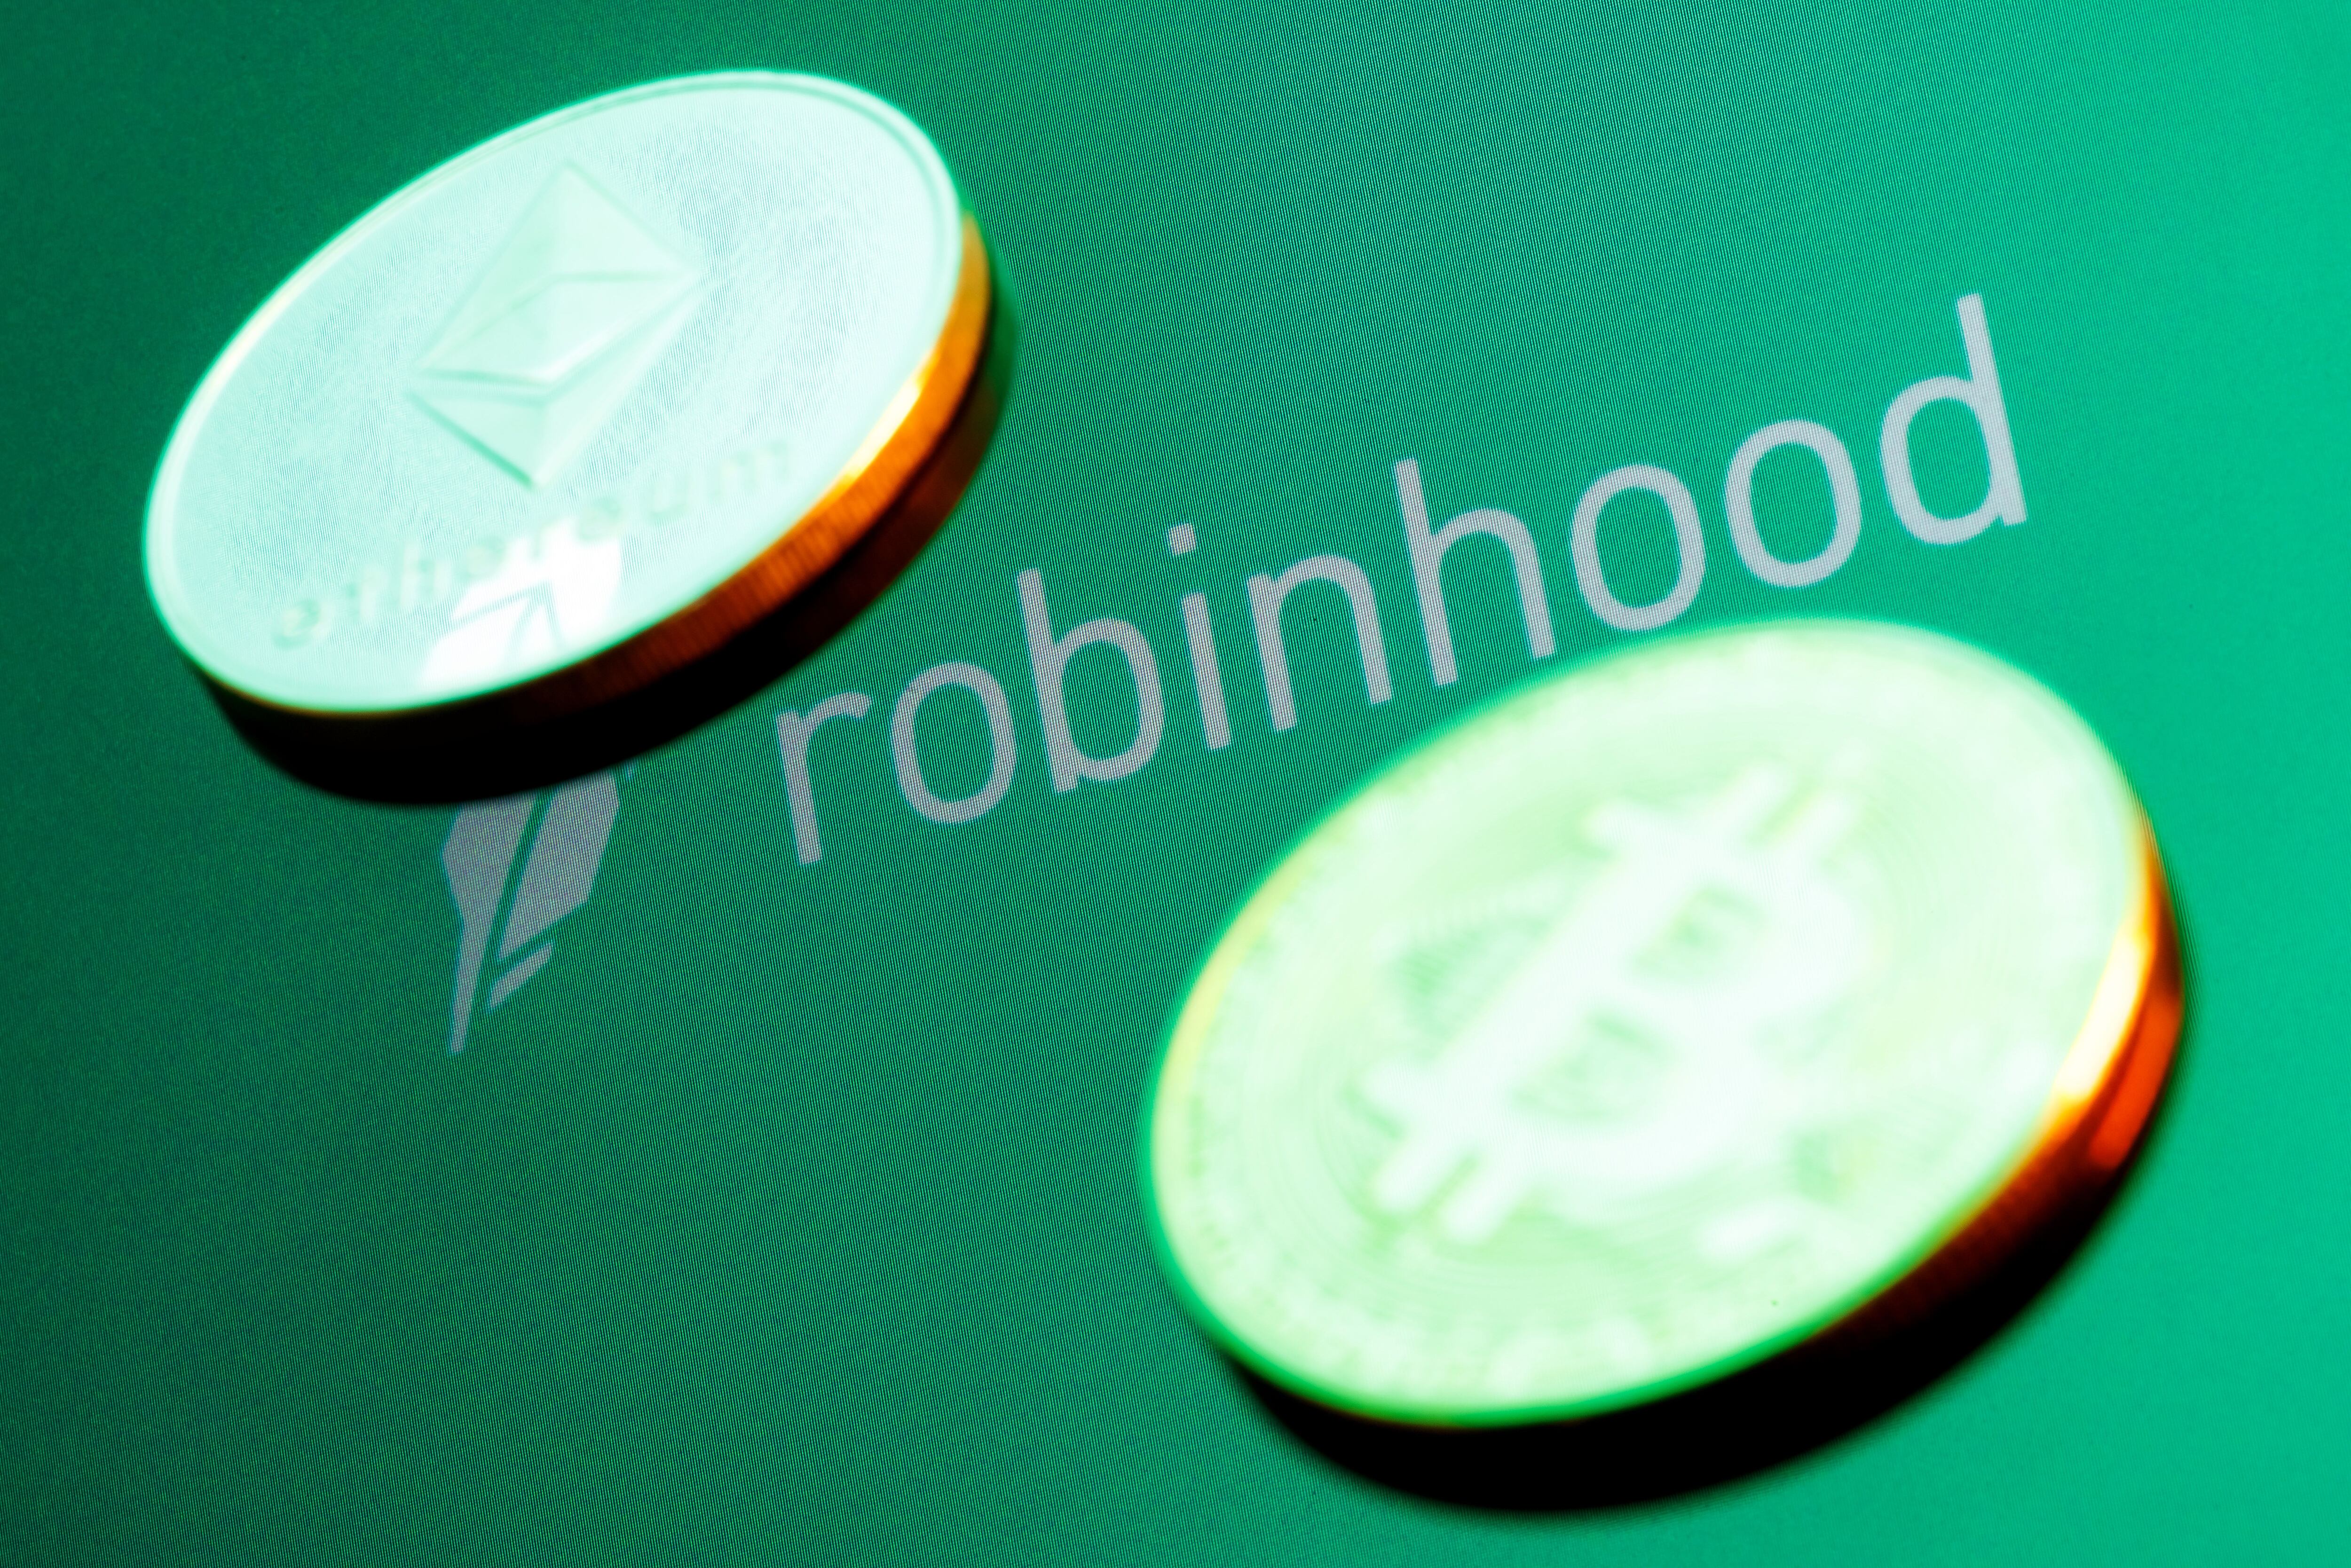 Robinhood’s crypto business is next target in US crackdown, filing reveals